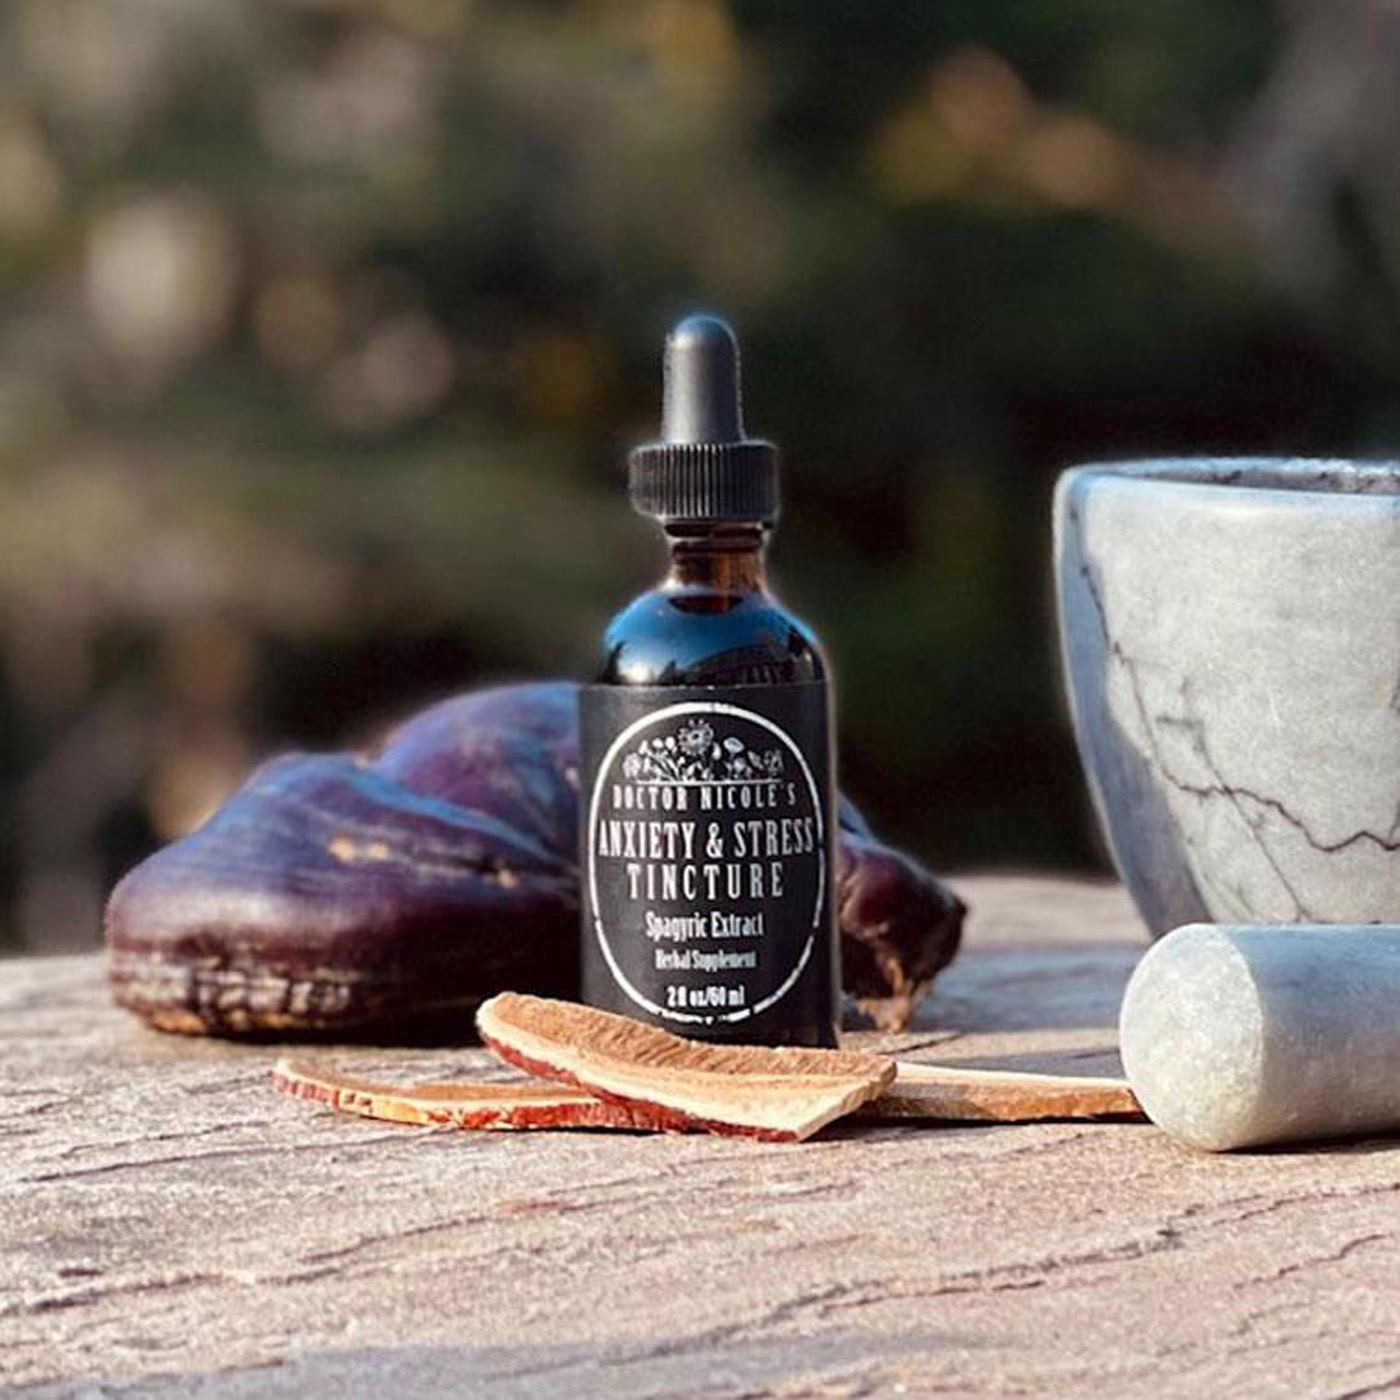 Nicole's Apothecary Anxiety & Stress Tincture can relieve tension from thyroid issues